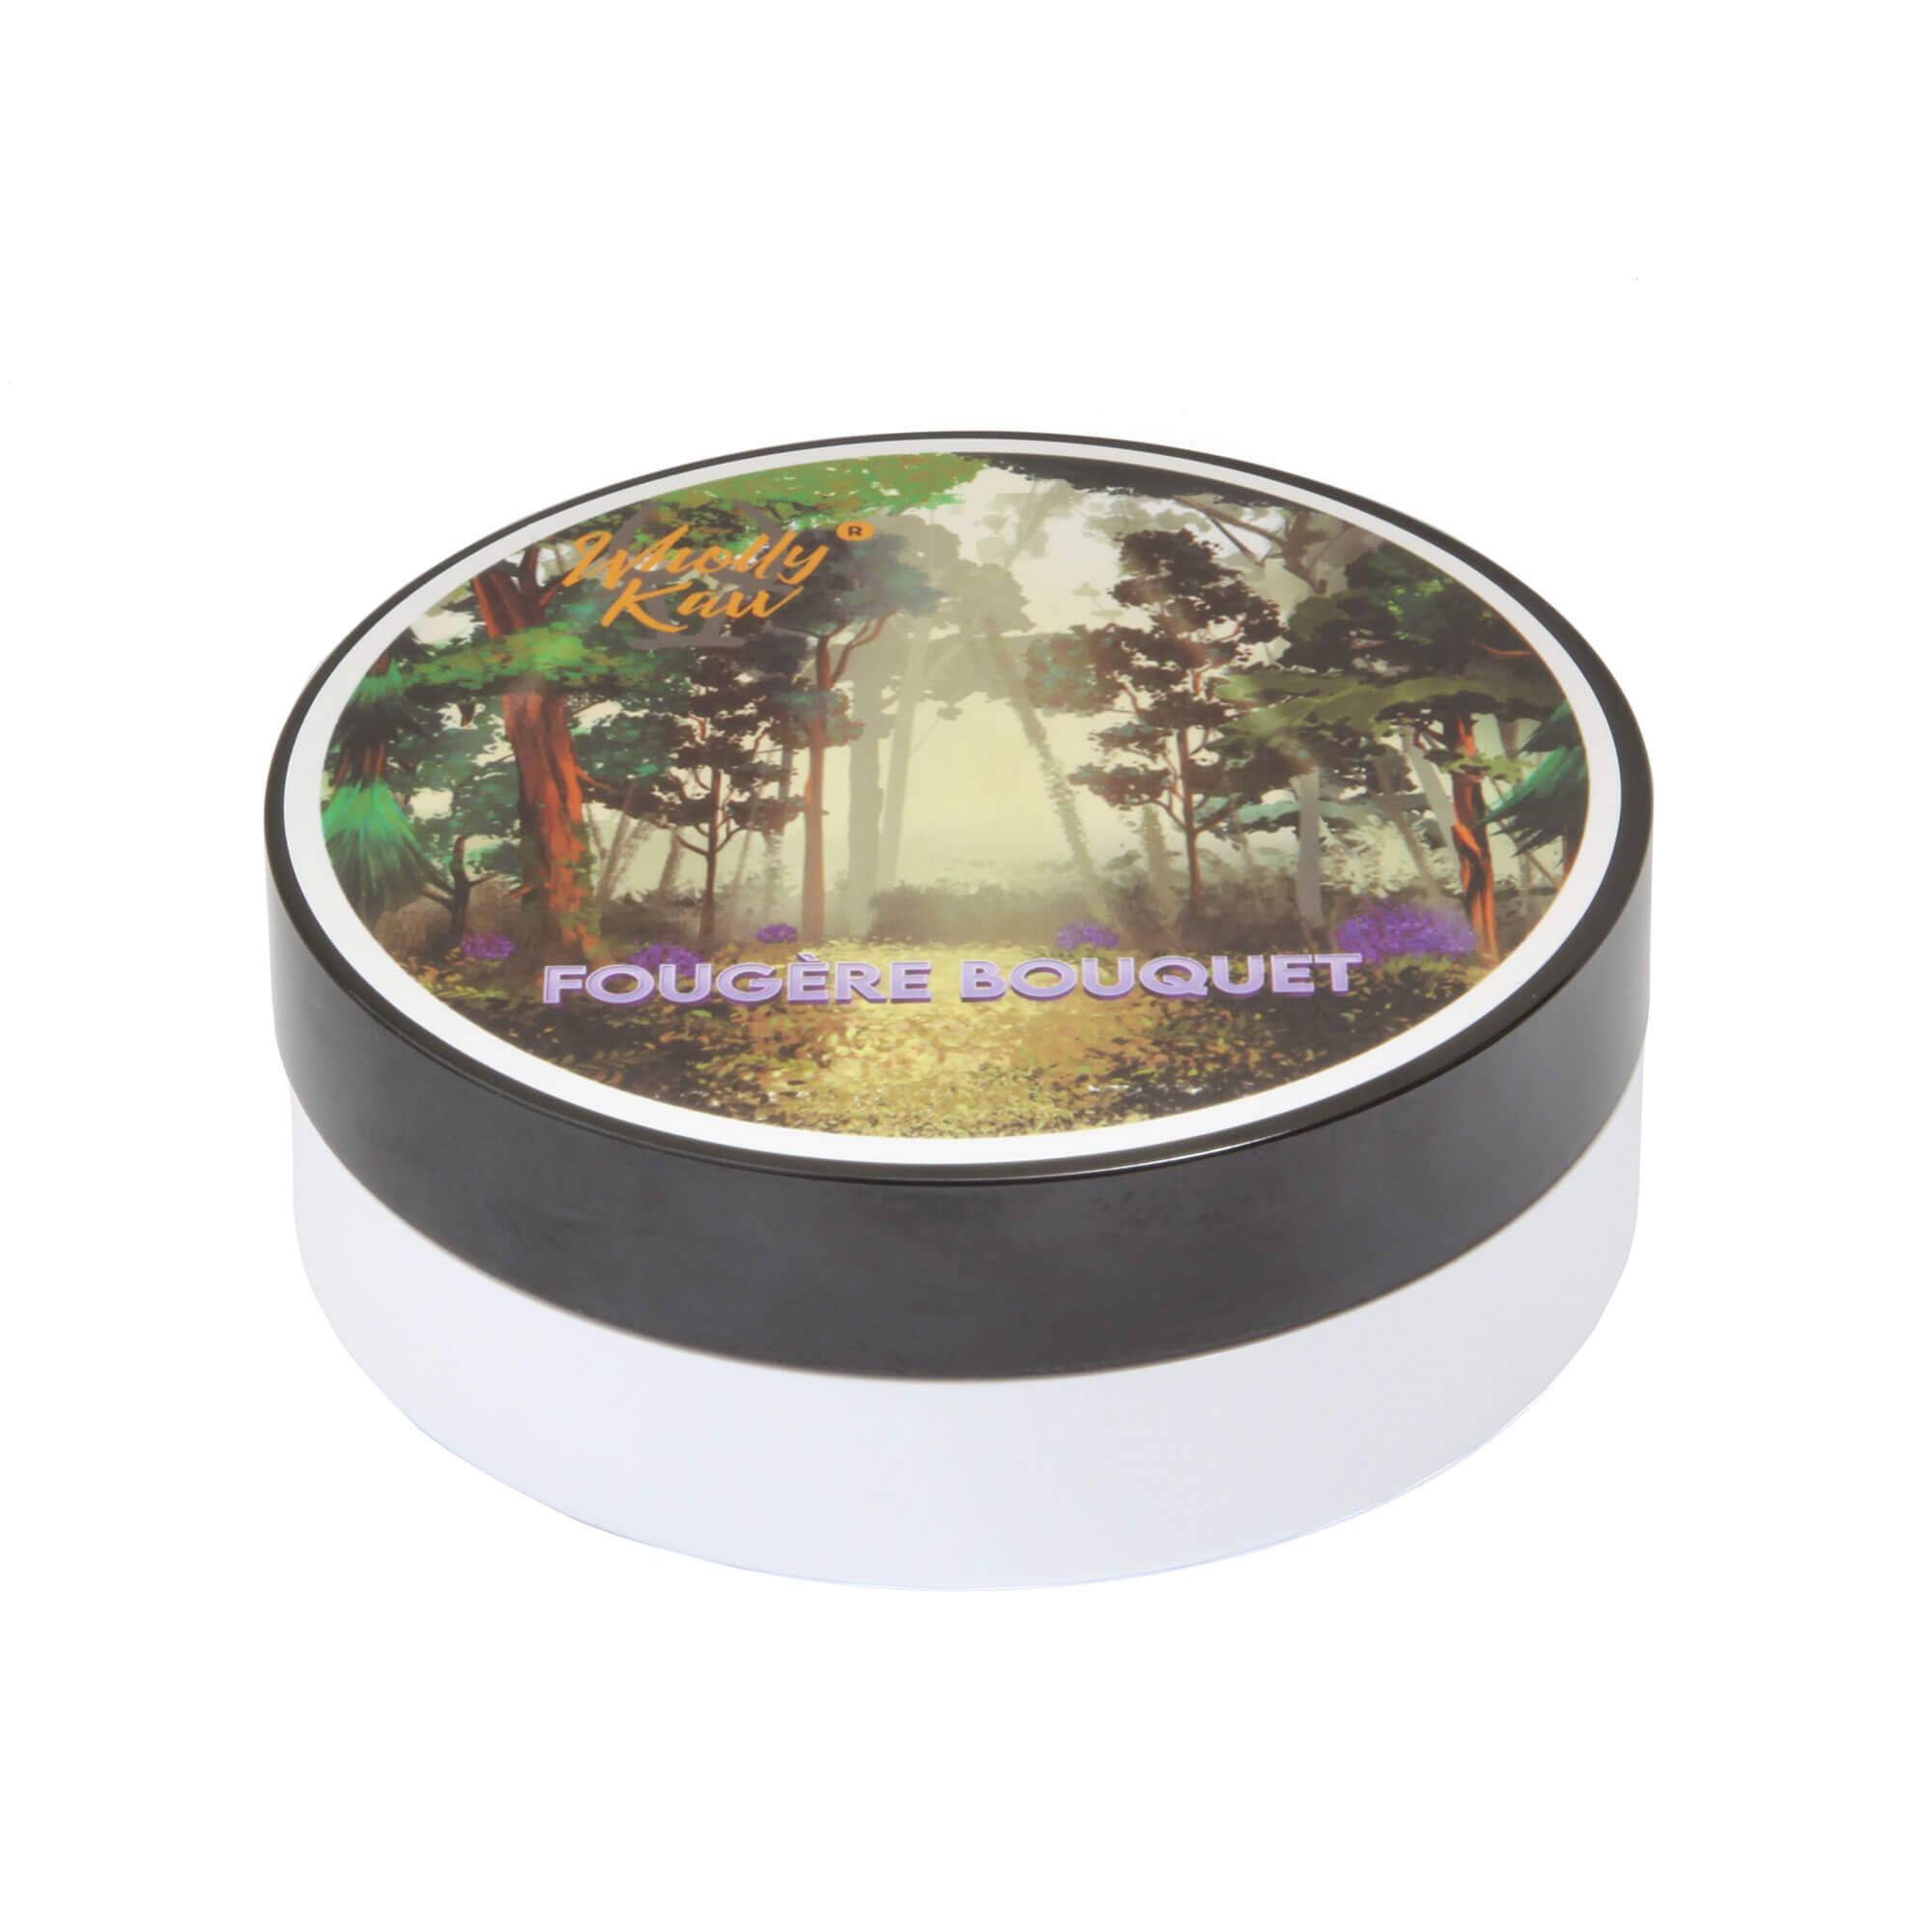 Wholly Kaw Fougere Bouquet Shaving Soap